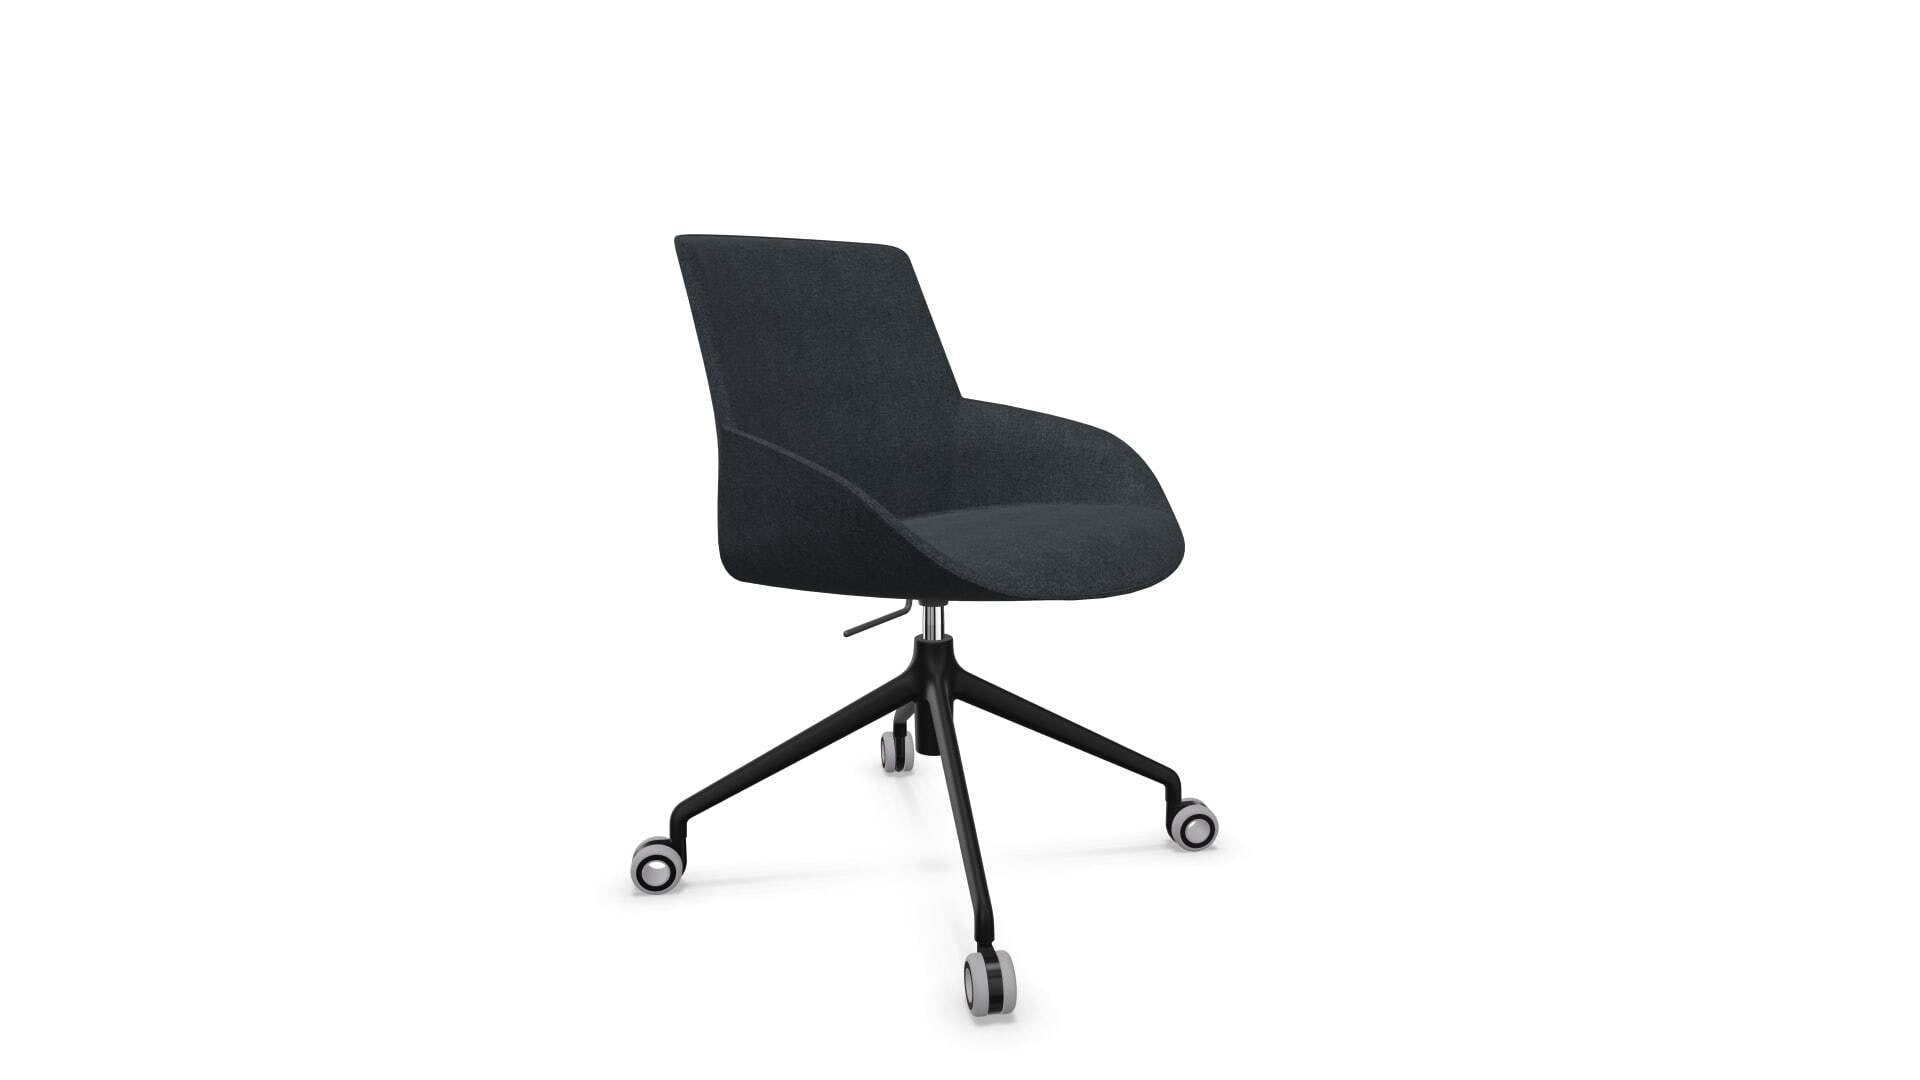 Noom Series 30 Chair with 4-Star Base Home, Office, Garden online marketplace